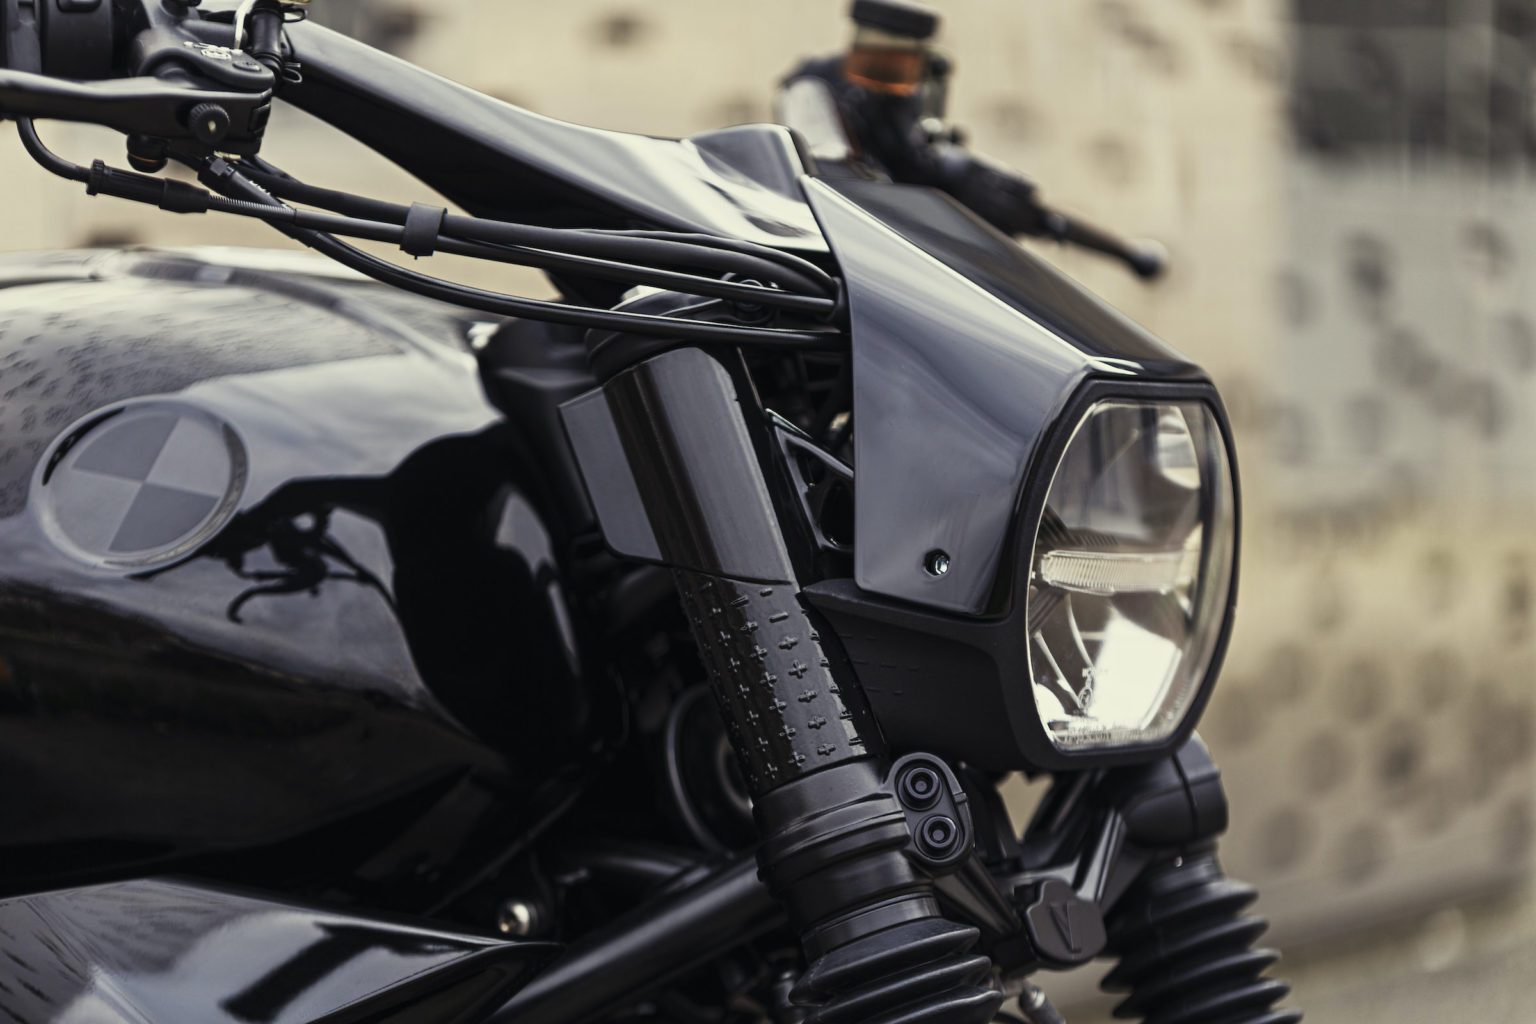 Cara - A Custom BMW R nineT by VIBA Built With A Range Of 3D Printed Parts